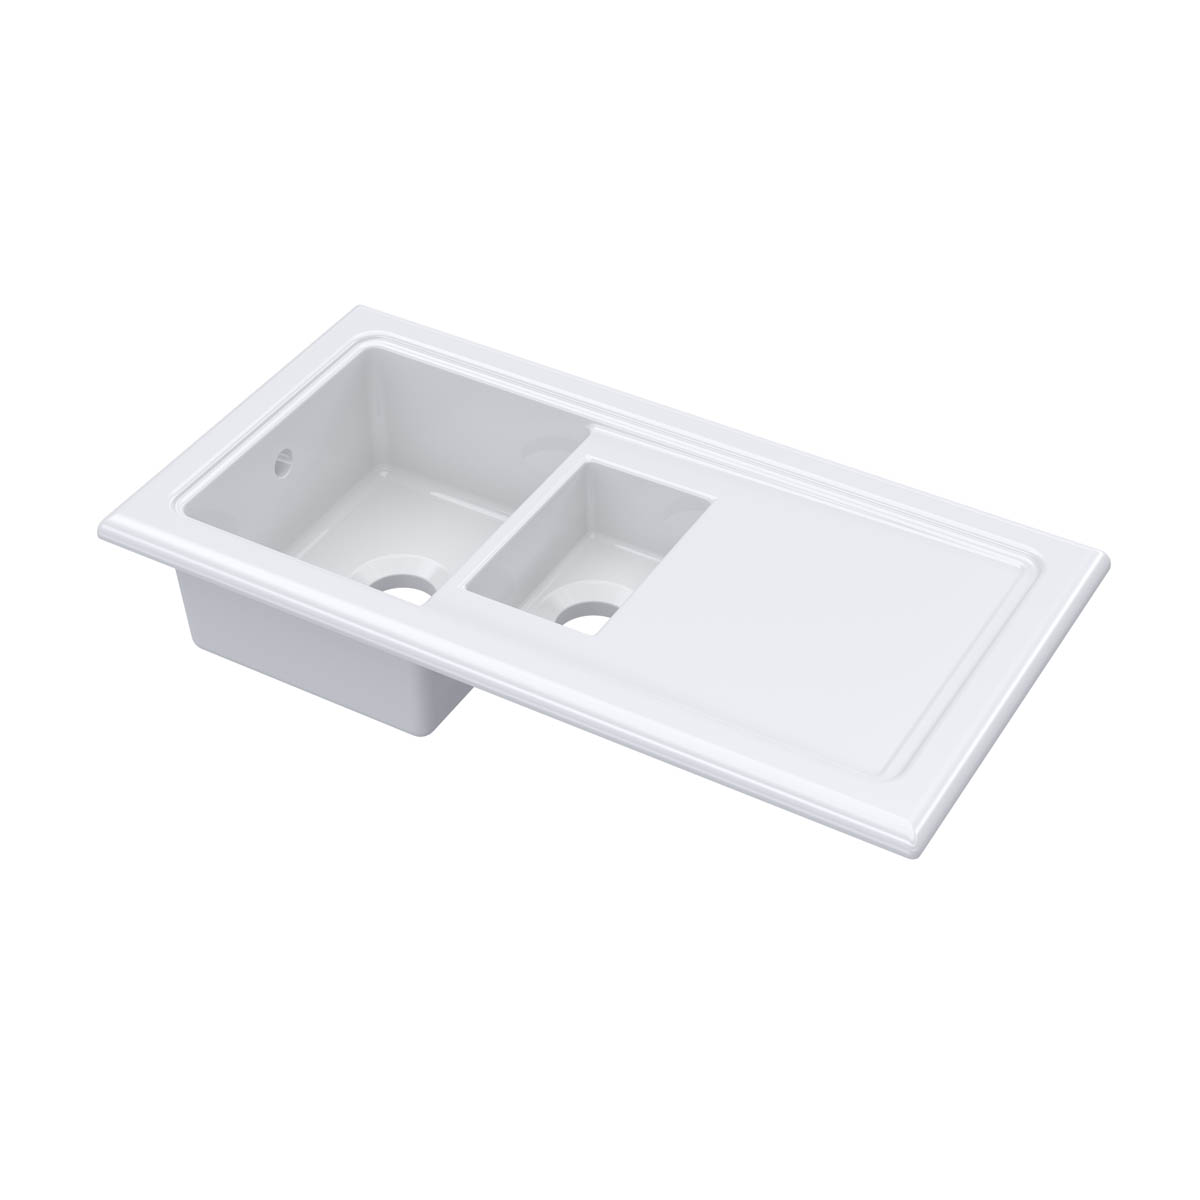 Nuie 1010x525mm 1.5 Bowl Counter Top Sink - White (20309)